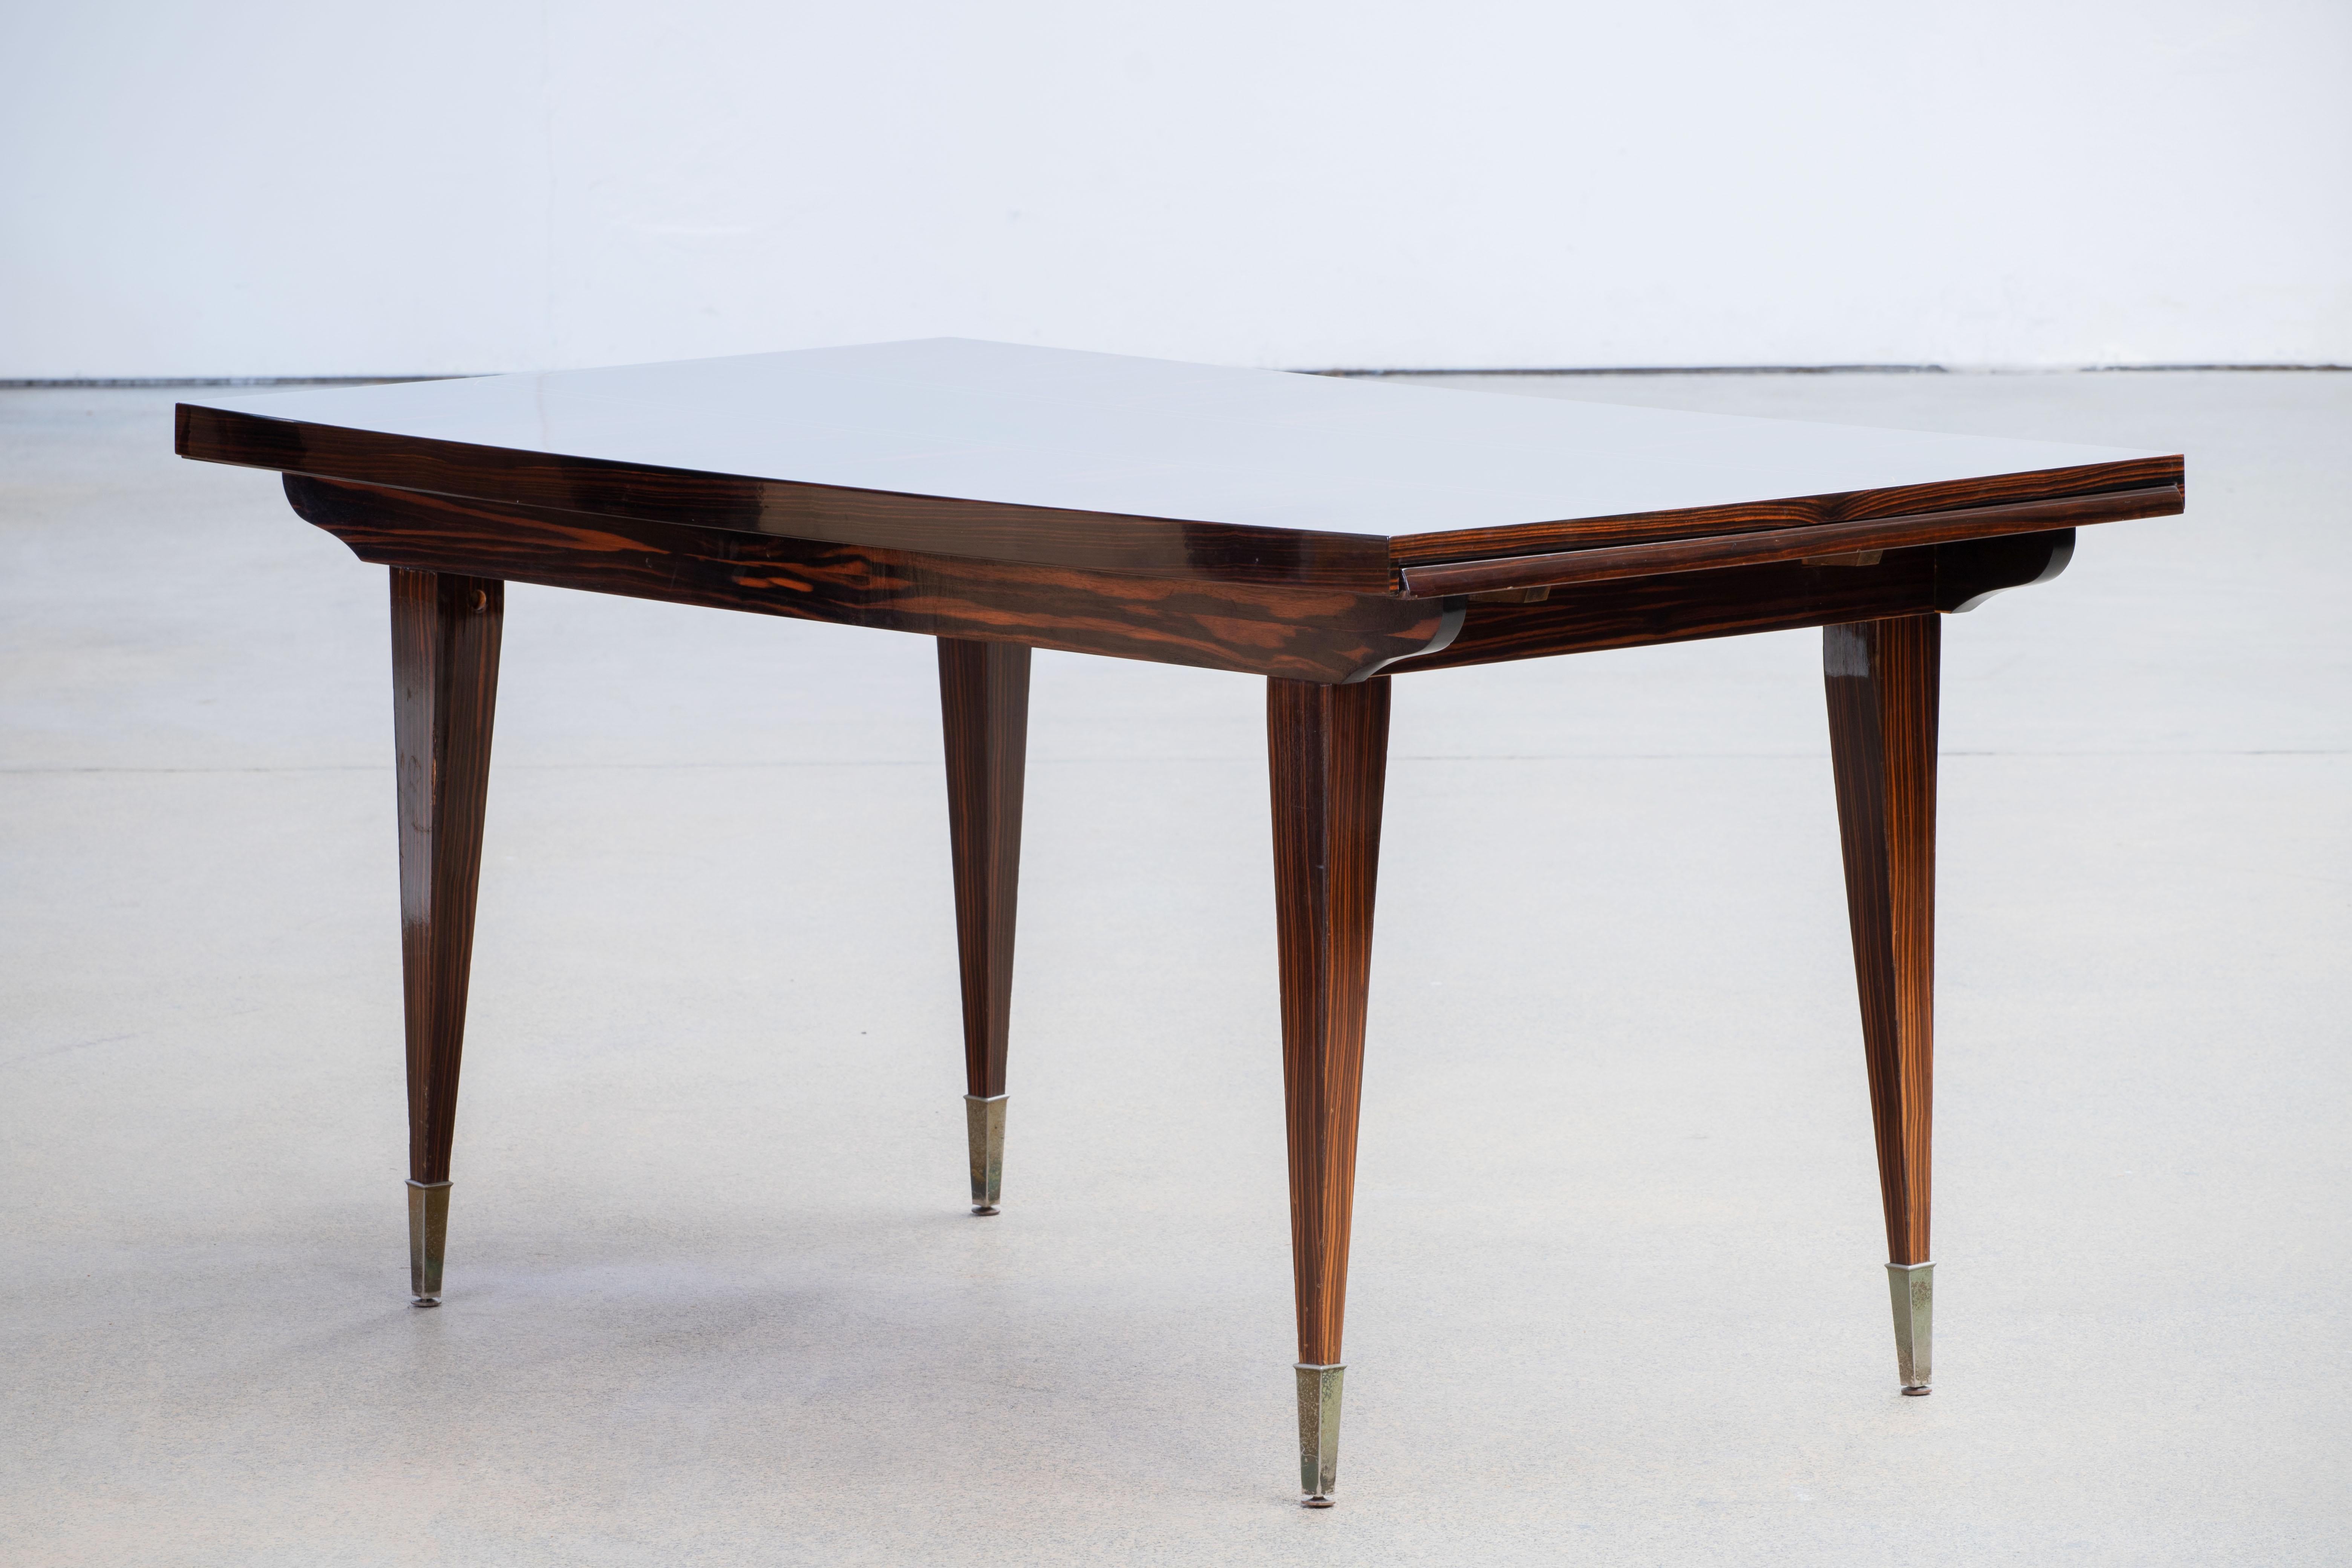 French Art Deco Brutalist Table, Macassar, 1940s For Sale 5